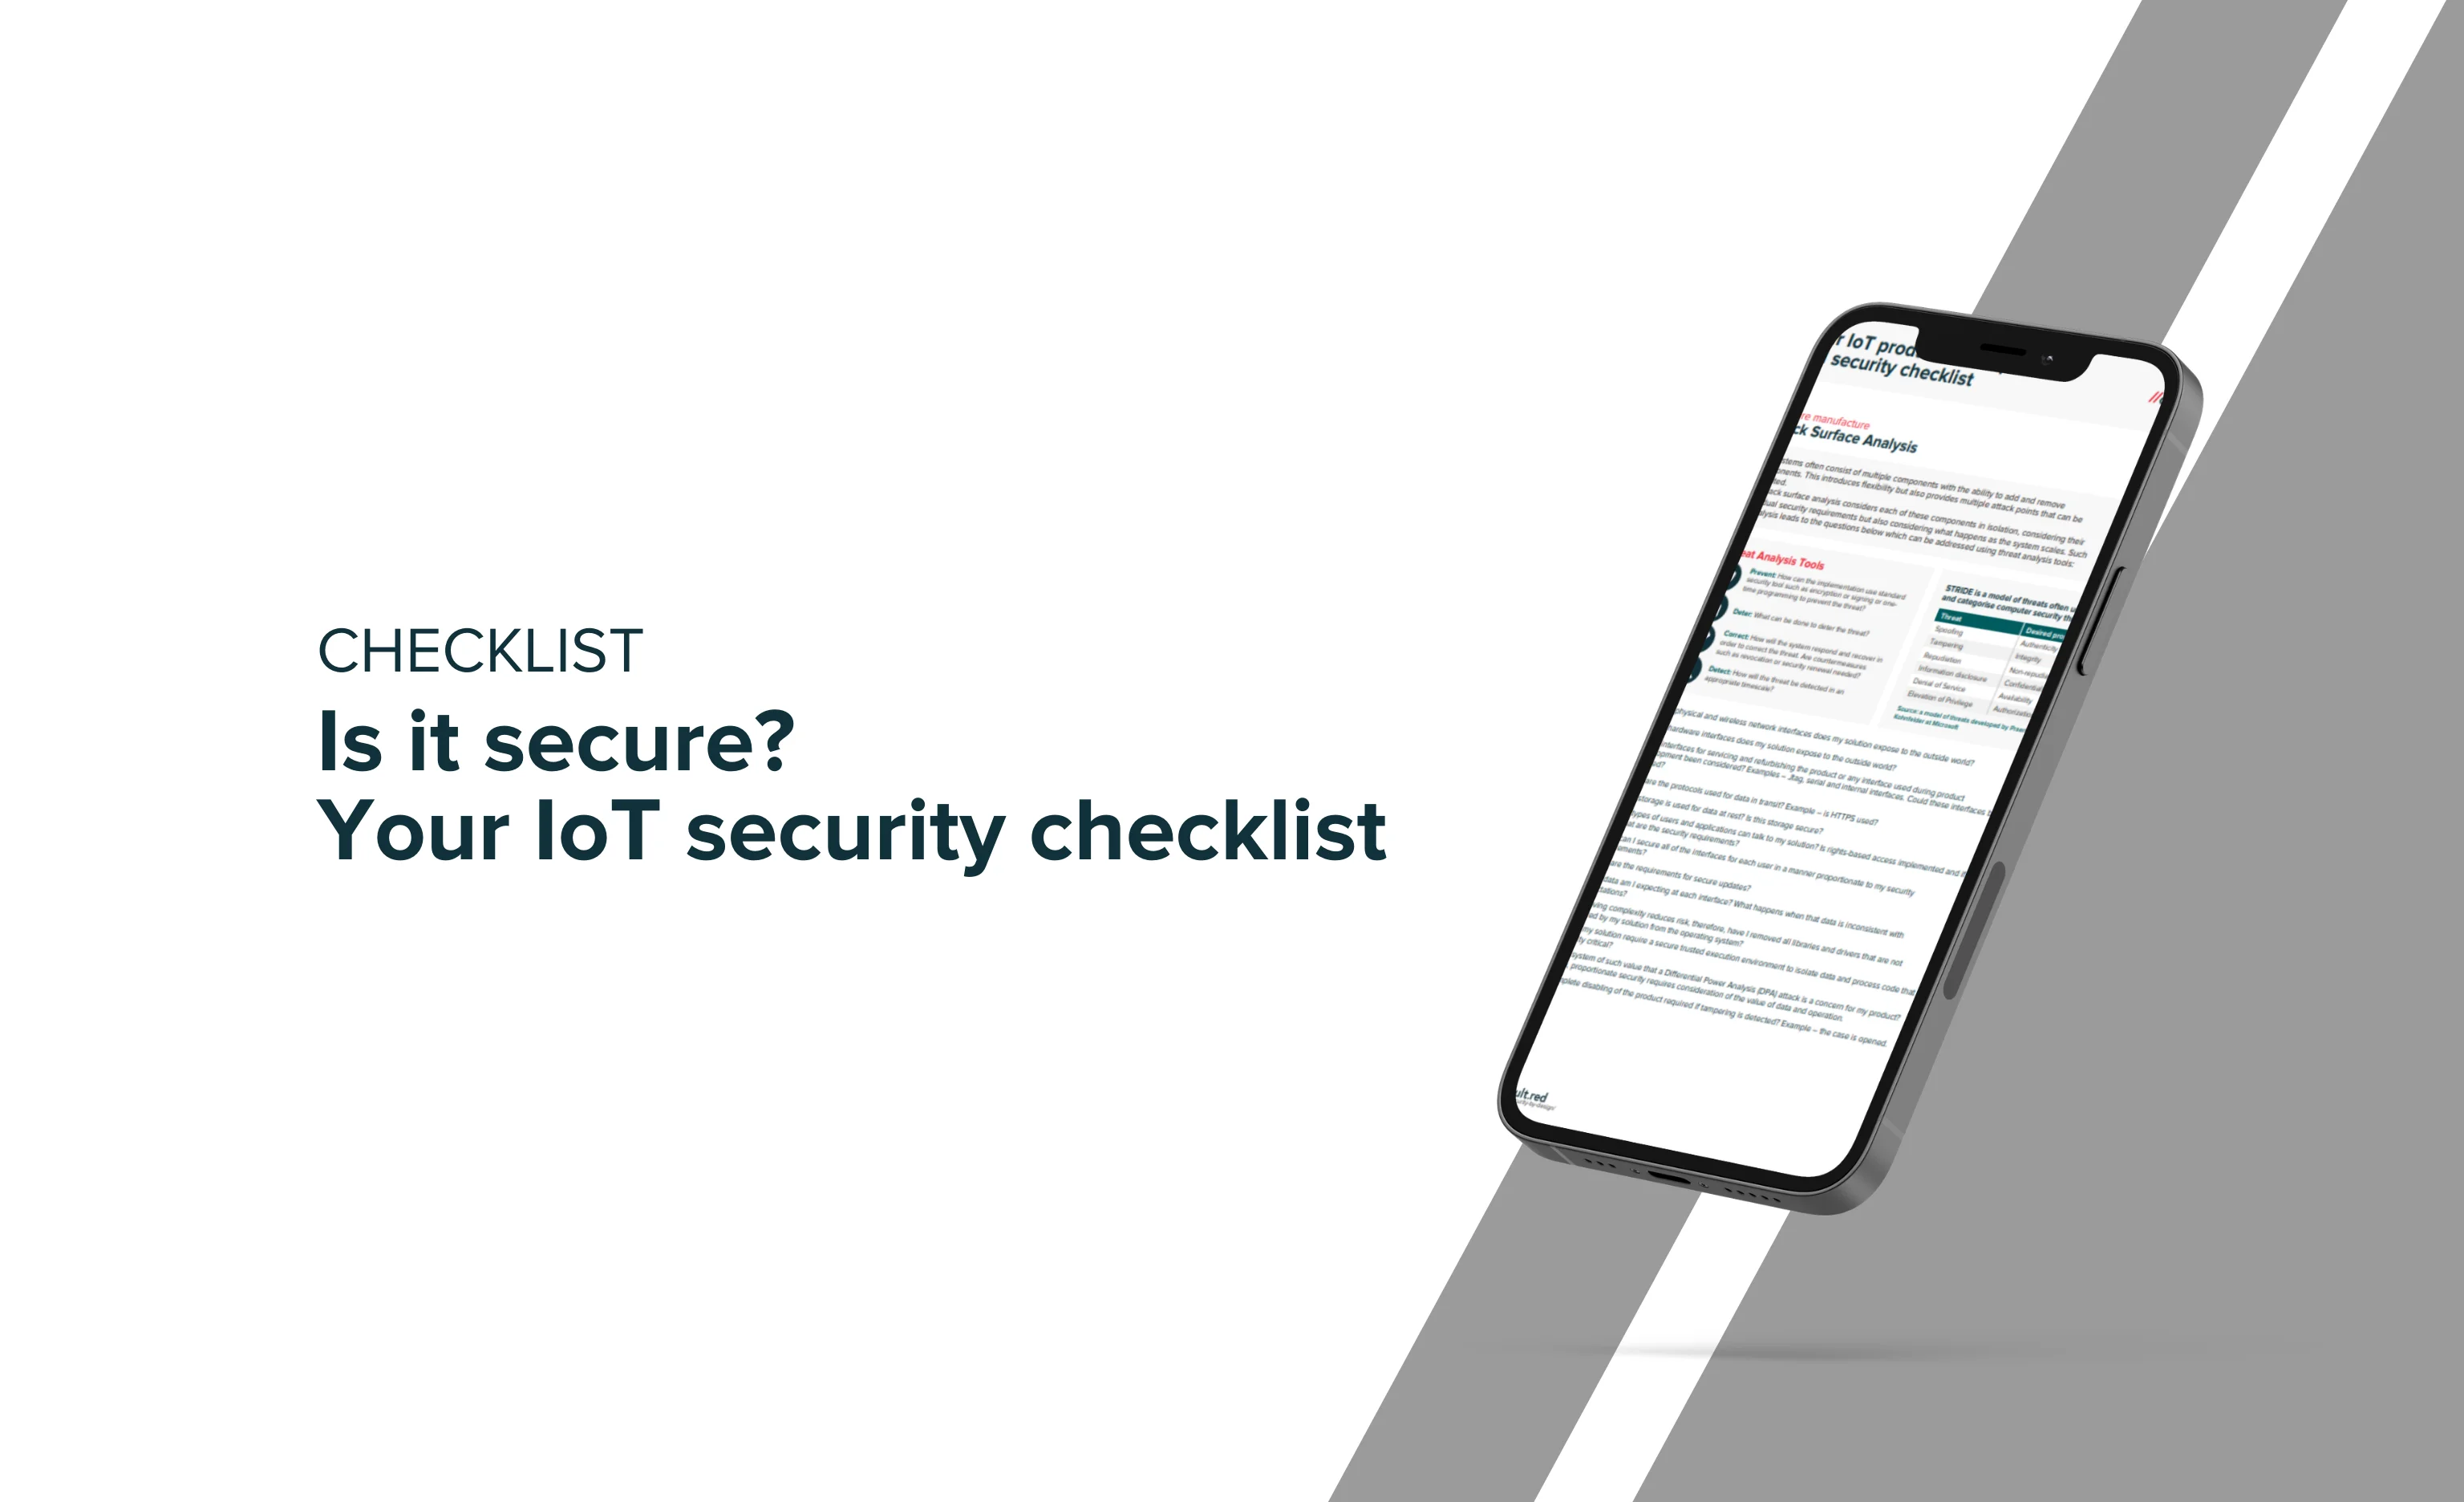 Is it secure? Your IoT security checklist